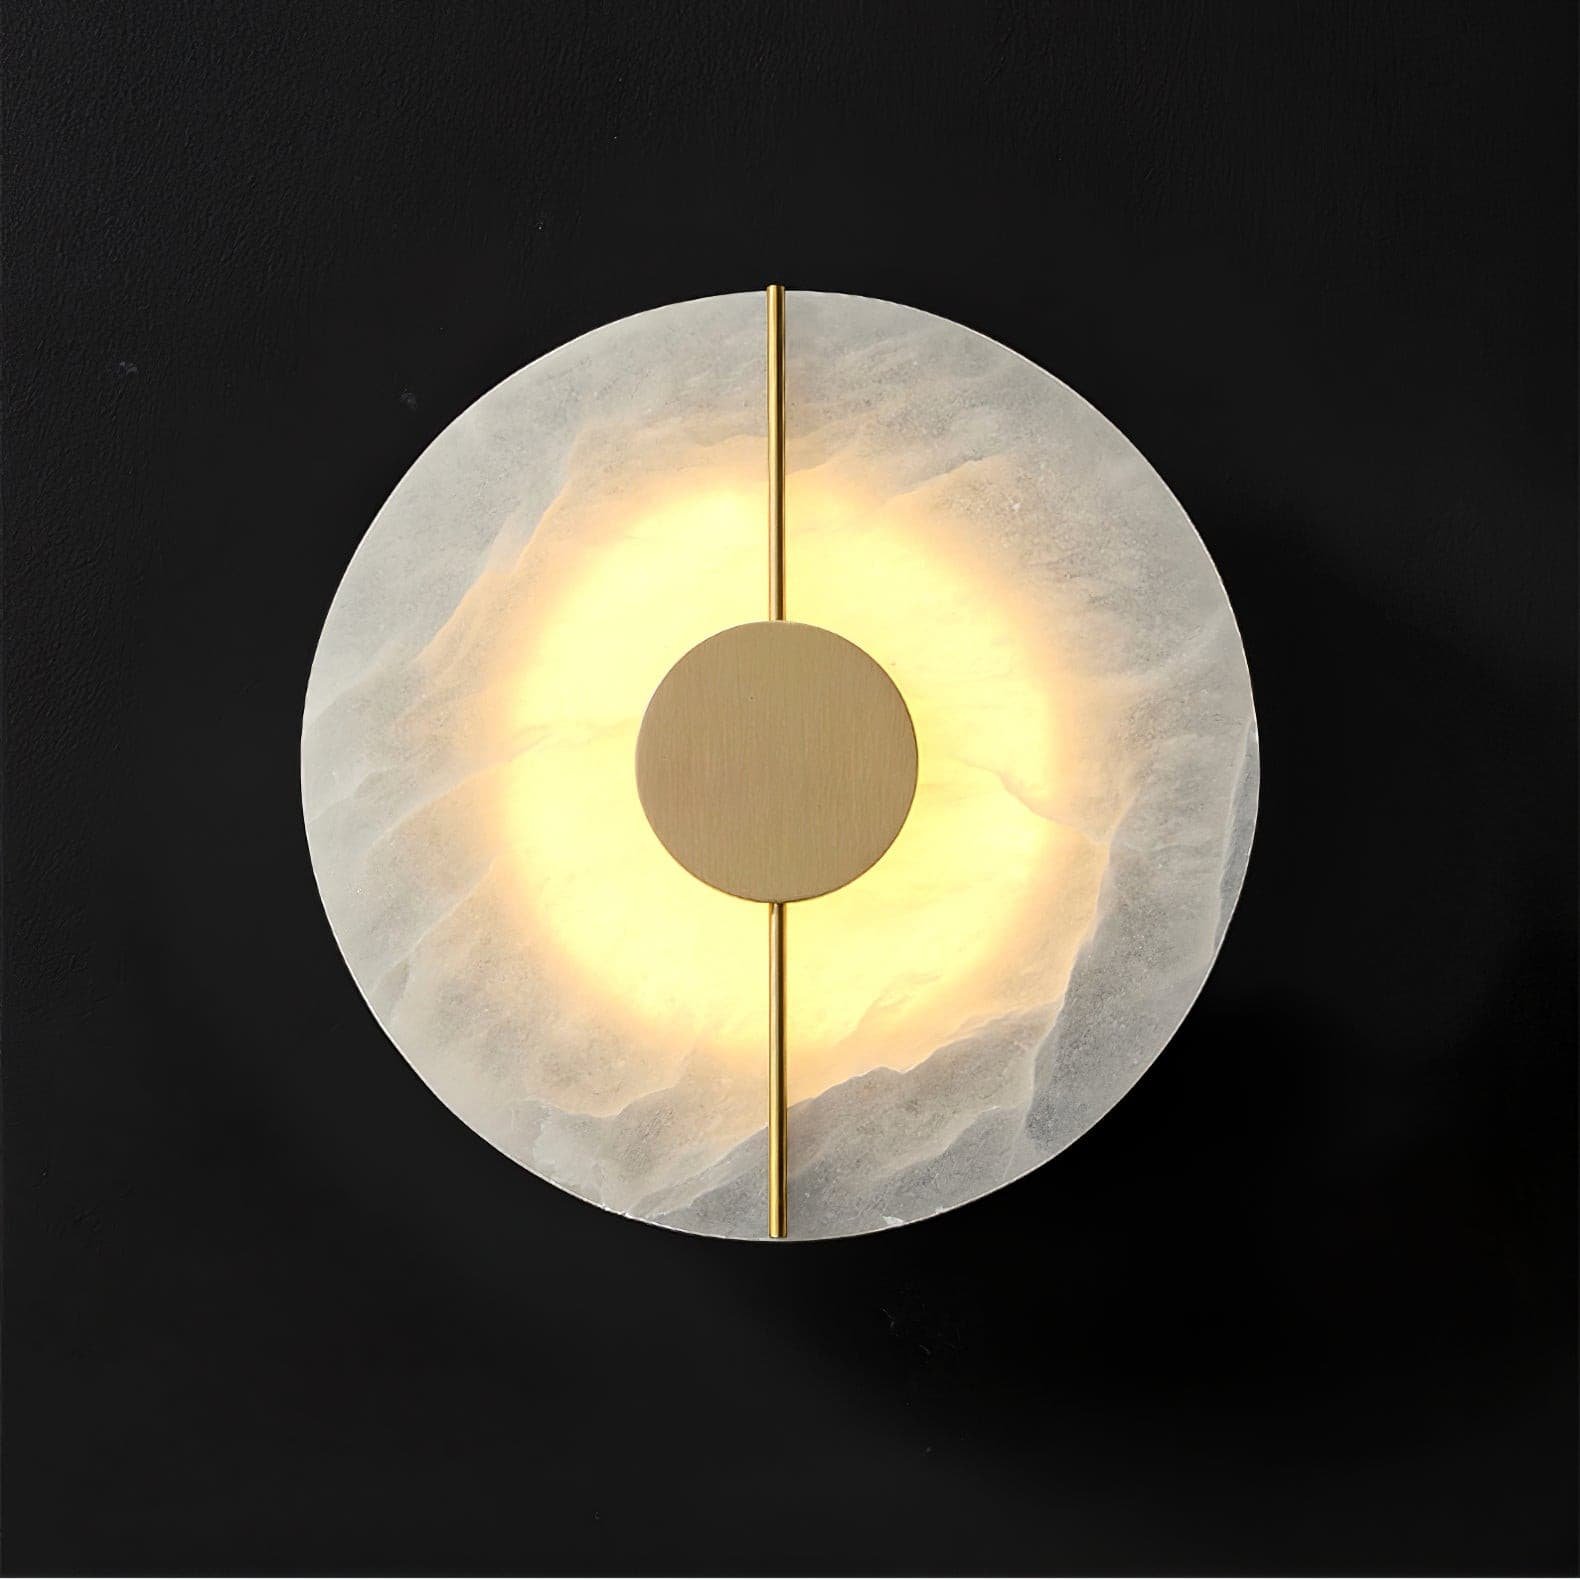 Artistic Marble Wall Lamp in White/Brass with Cool Light, Diameter 7.9" x Height 7.9" (20cm x 20cm)